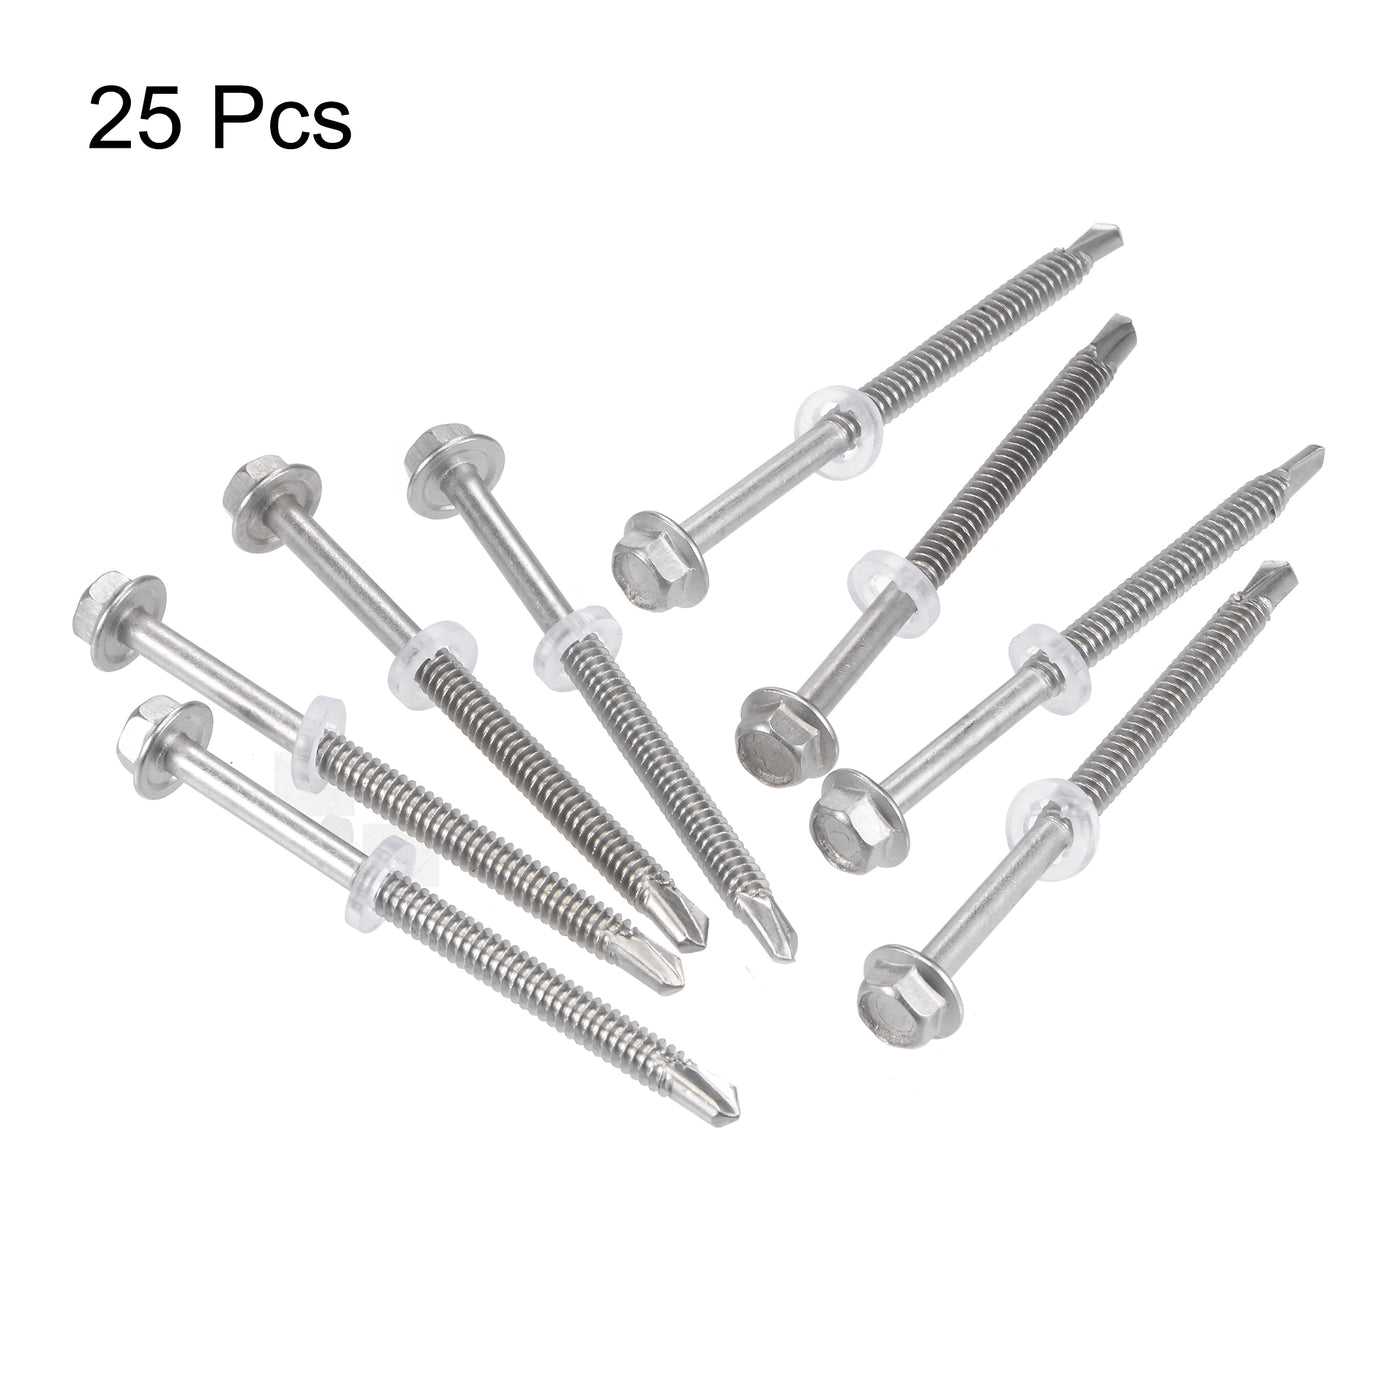 uxcell Uxcell #12 x 2 61/64" 410 Stainless Steel Hex Washer Head Self Drilling Screws 25pcs